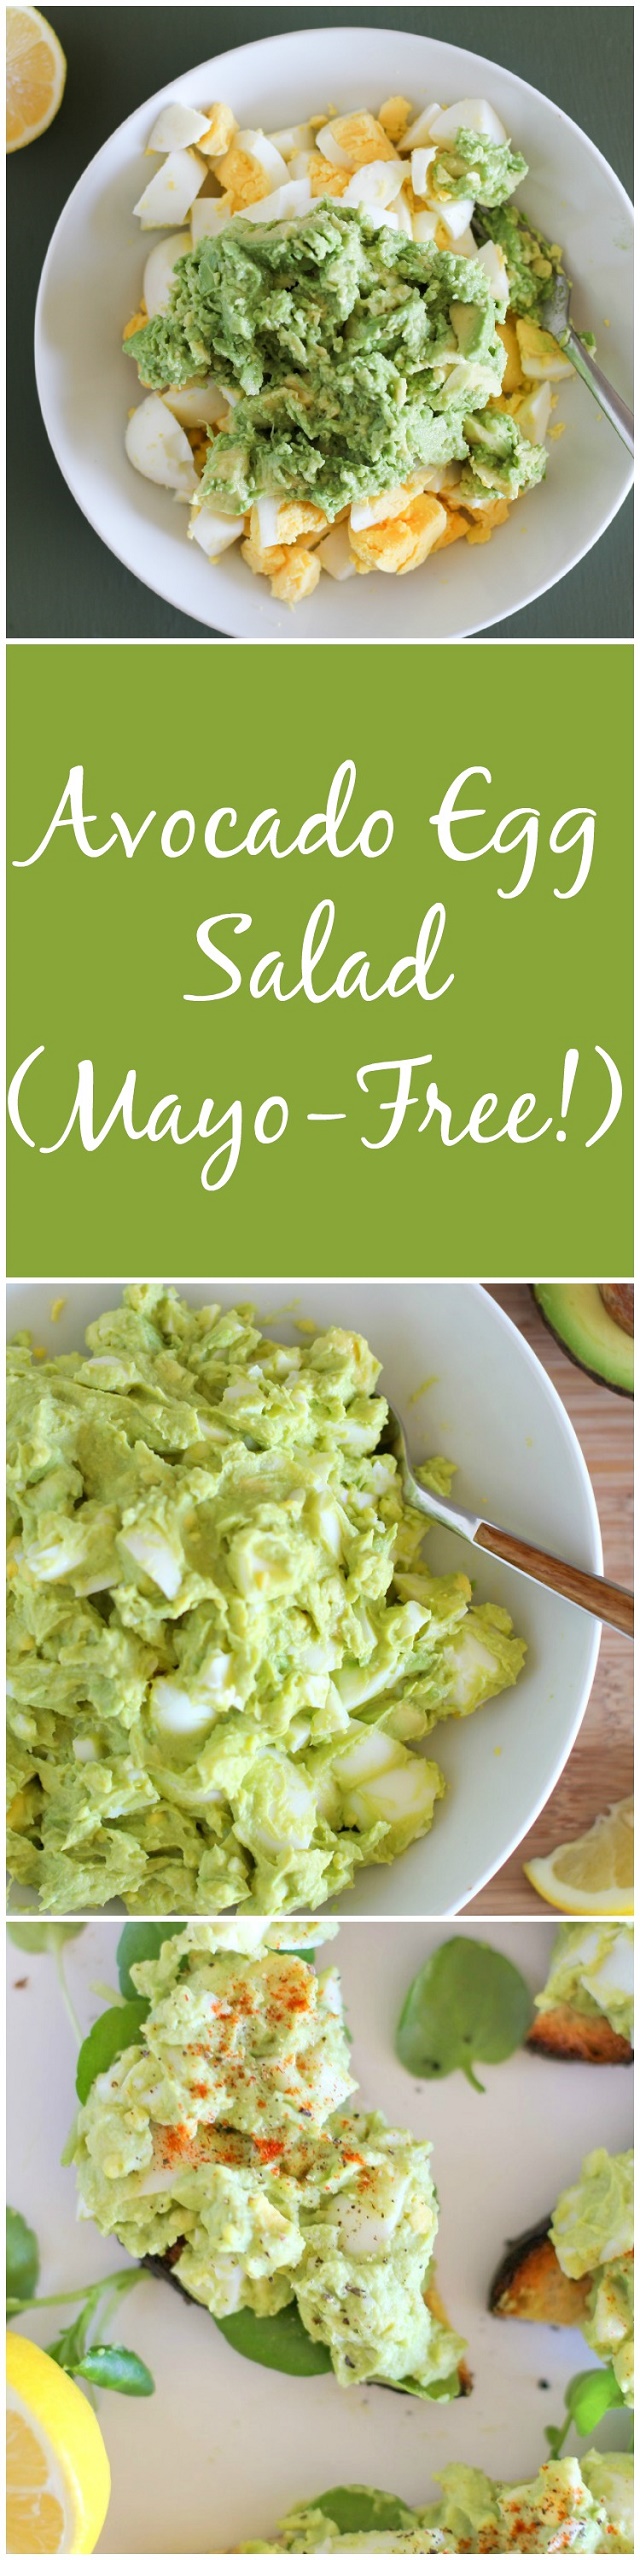 Avocado Egg Salad (Mayo-Free!) - an easy 4-ingredient lunch recipe | theroastedroot.net #paleo